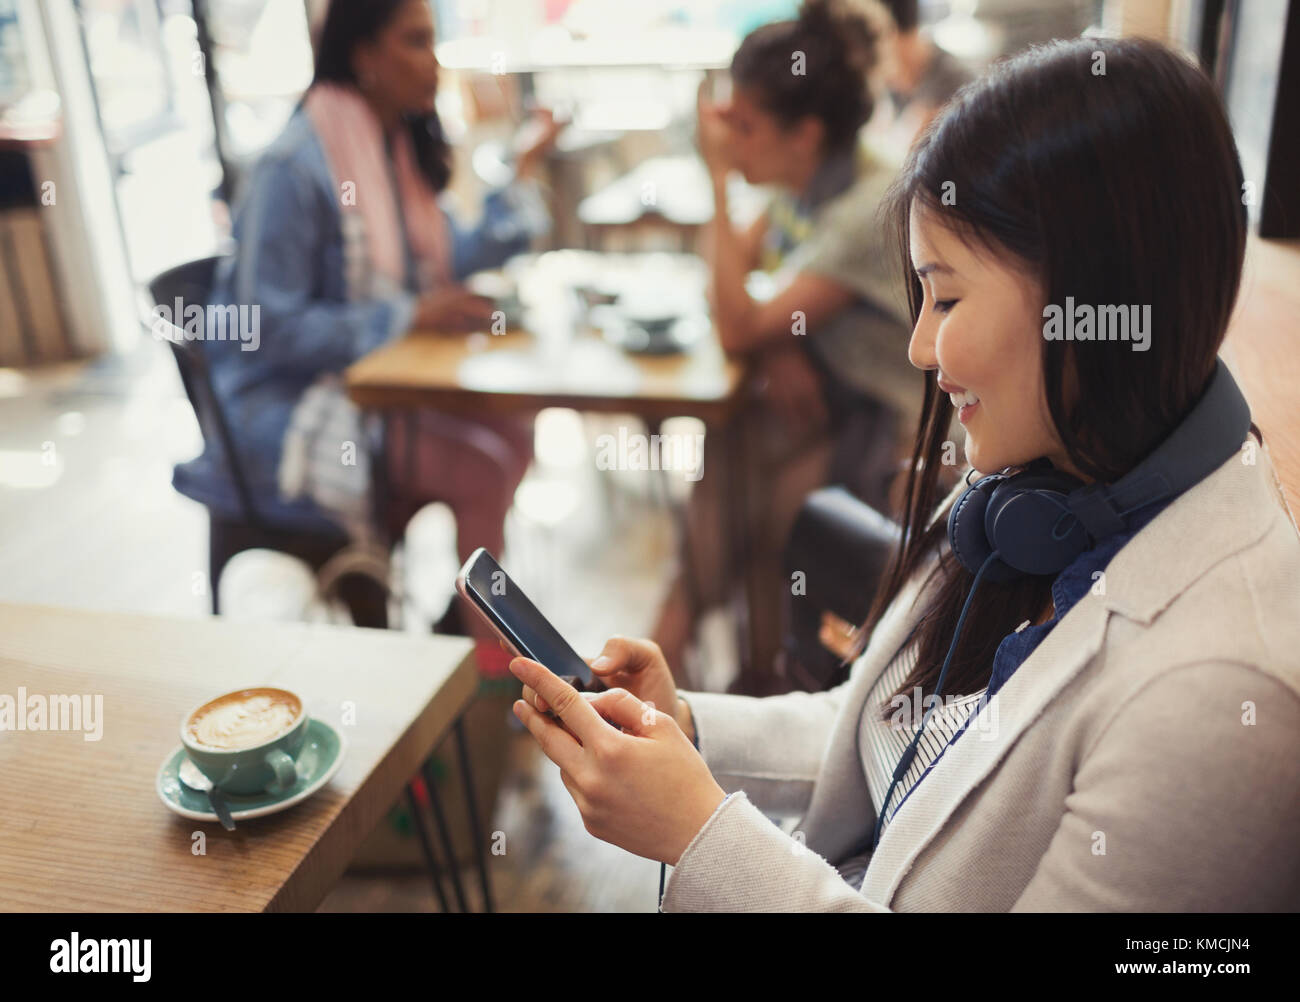 Smiling young woman texting with cell phone and drinking coffee at cafe table Stock Photo